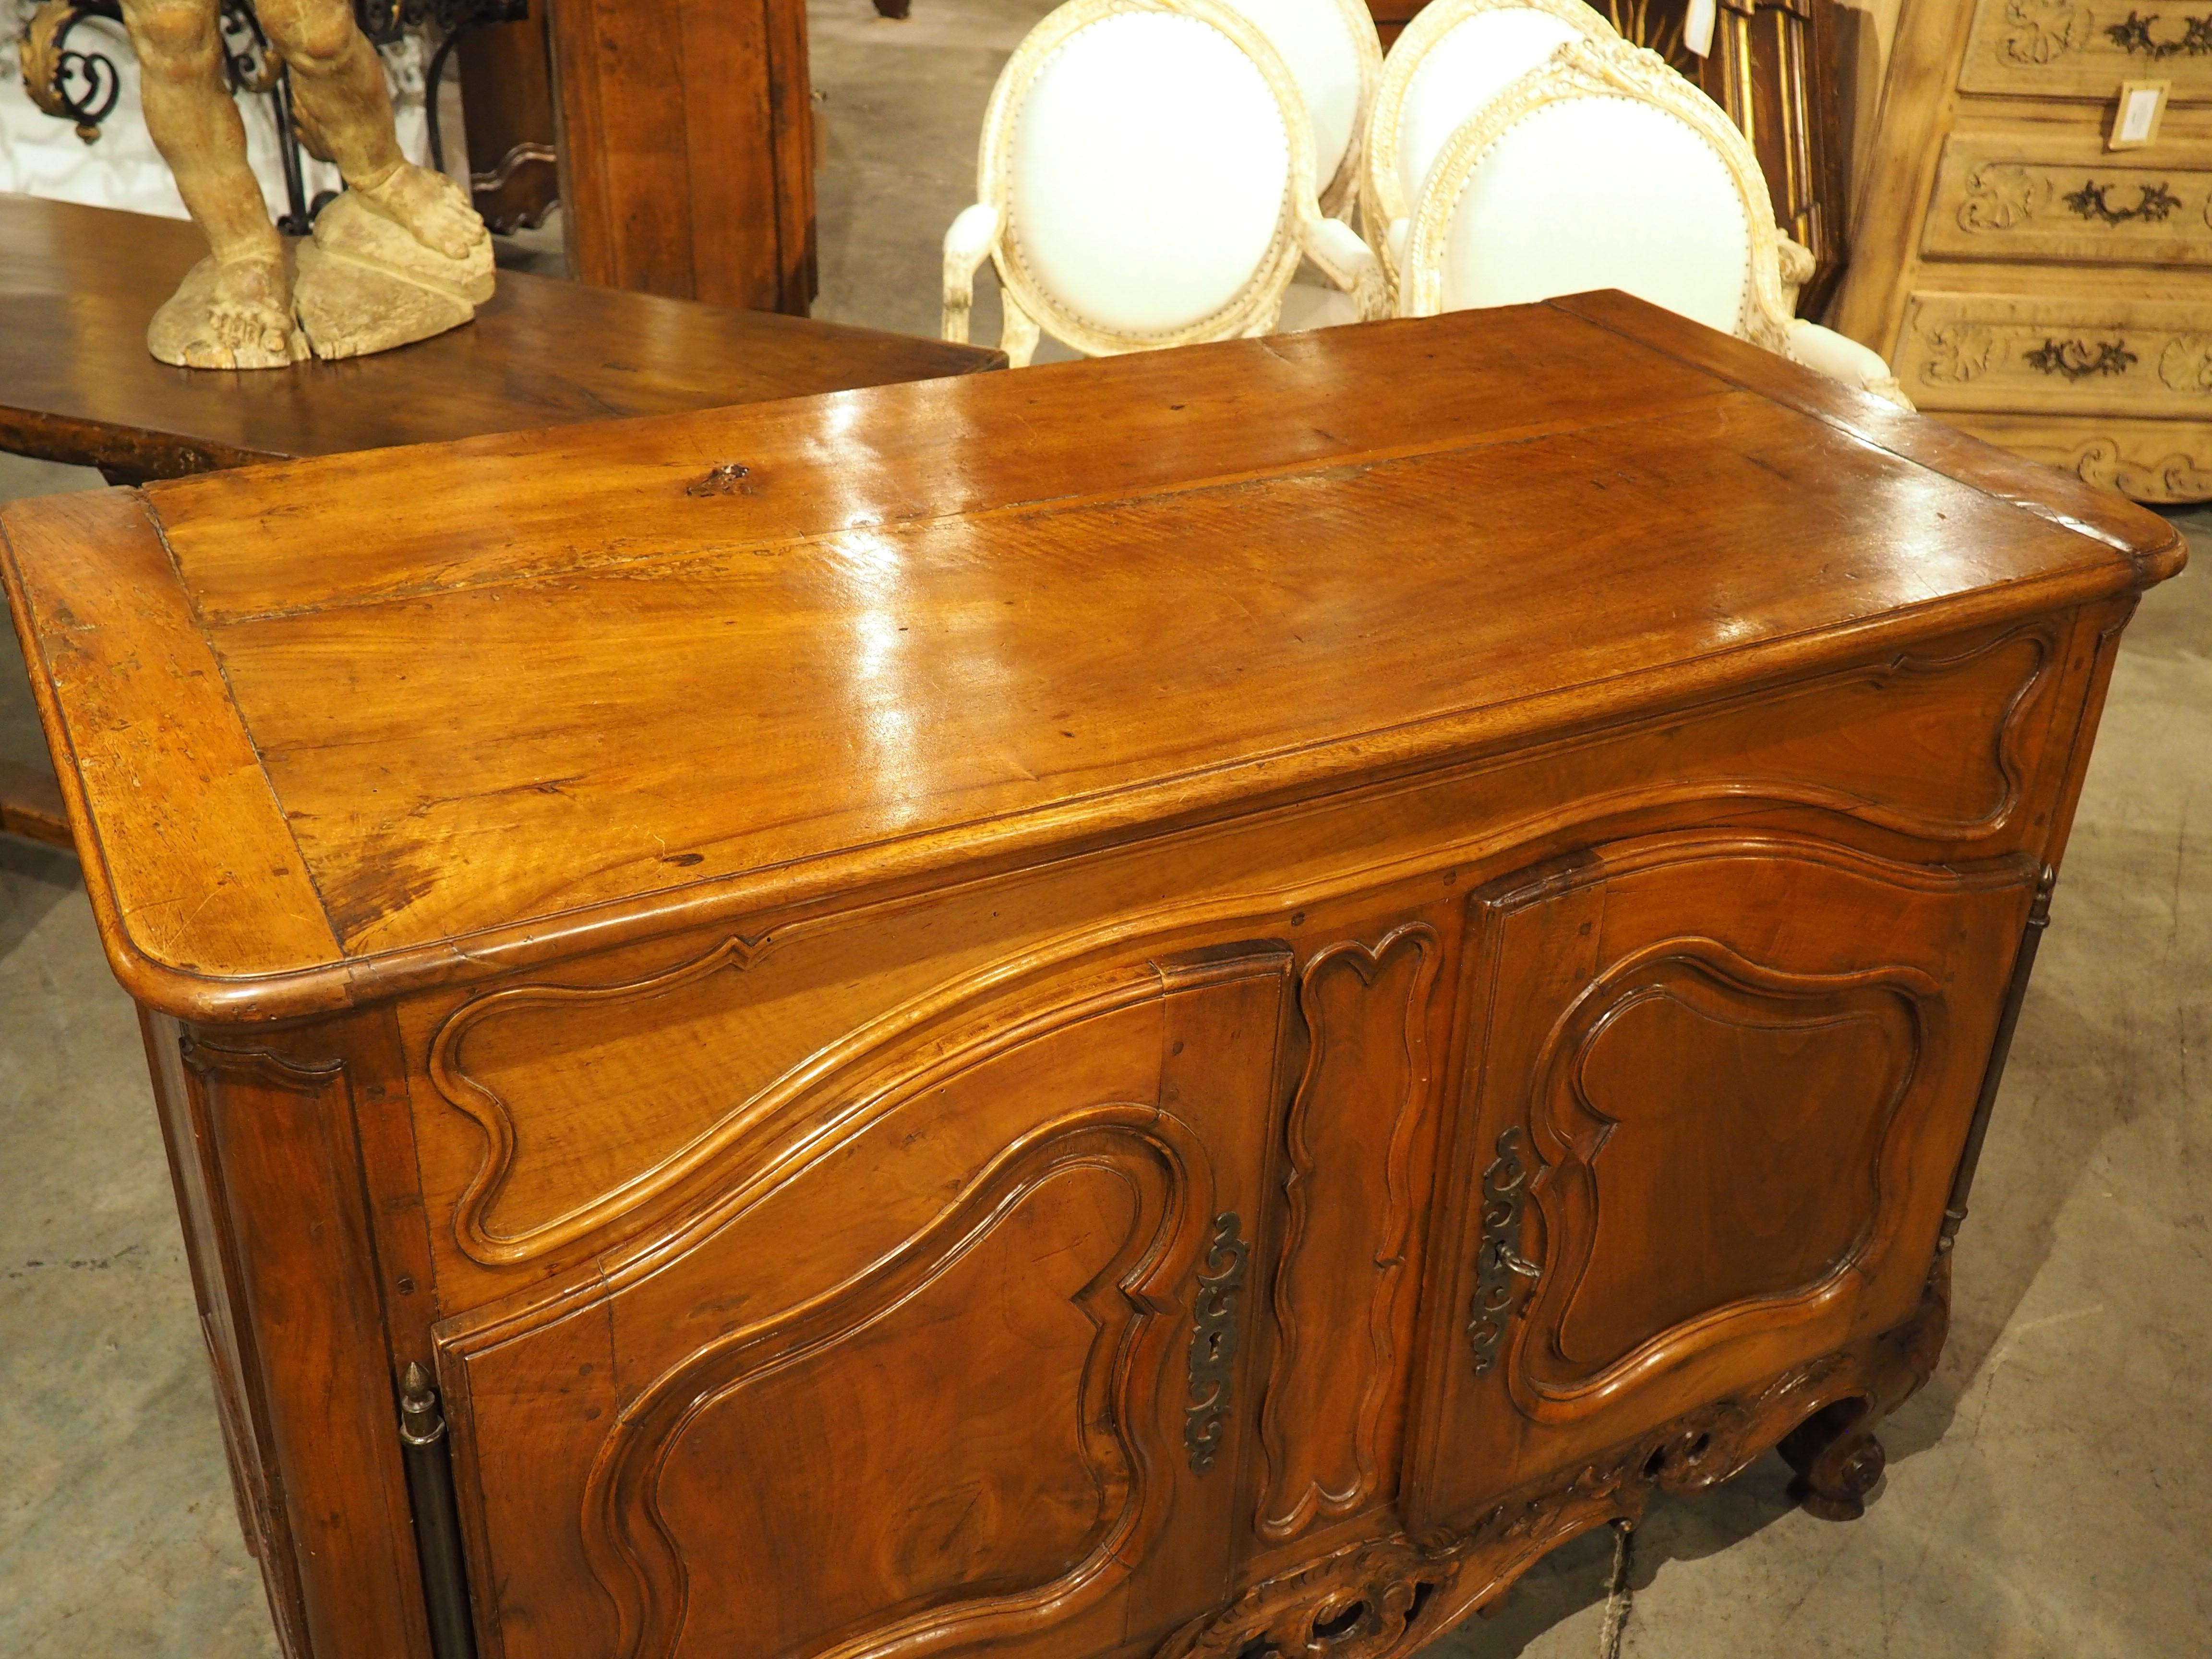 Circa 1750 Carved Walnut Wood Buffet Crédence from Nîmes, France 4